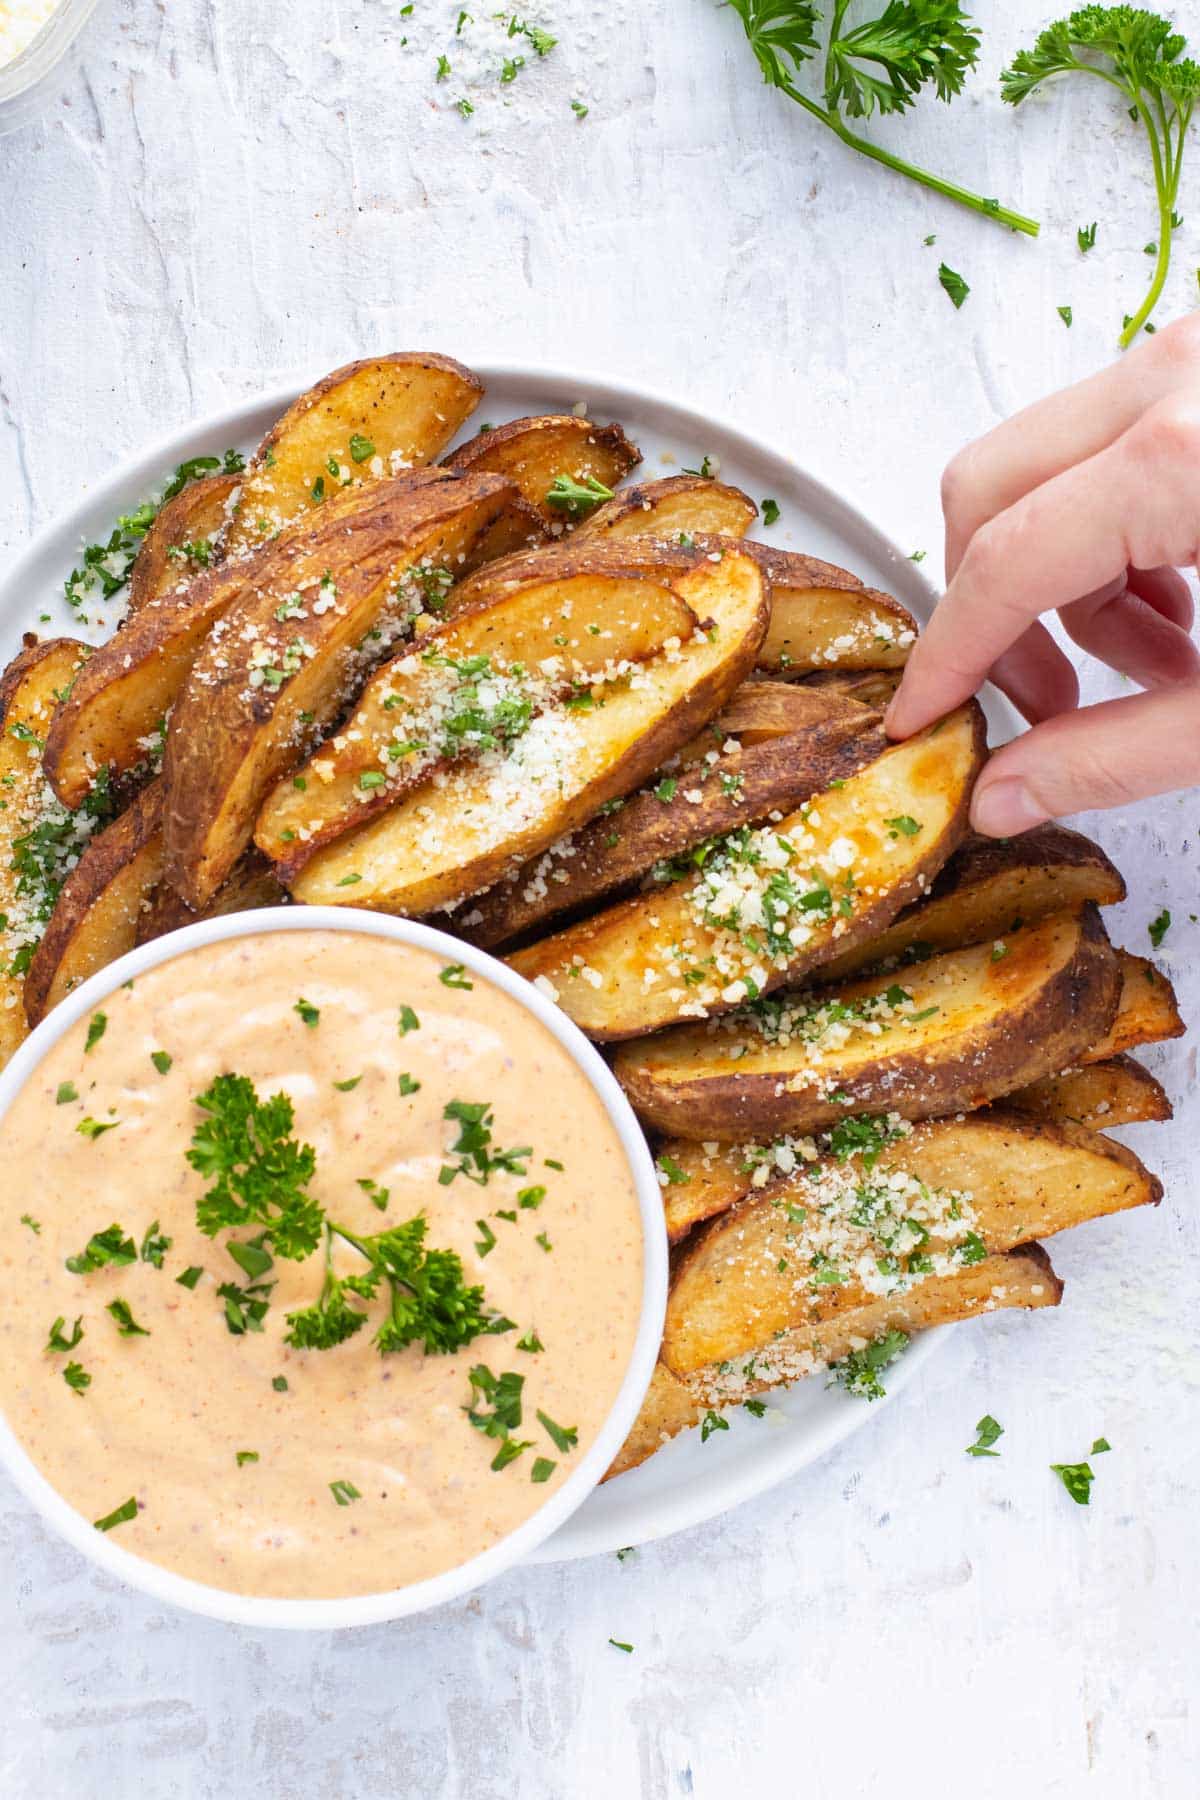 A hand grabbing a roasted potato wedge from a plate of them.